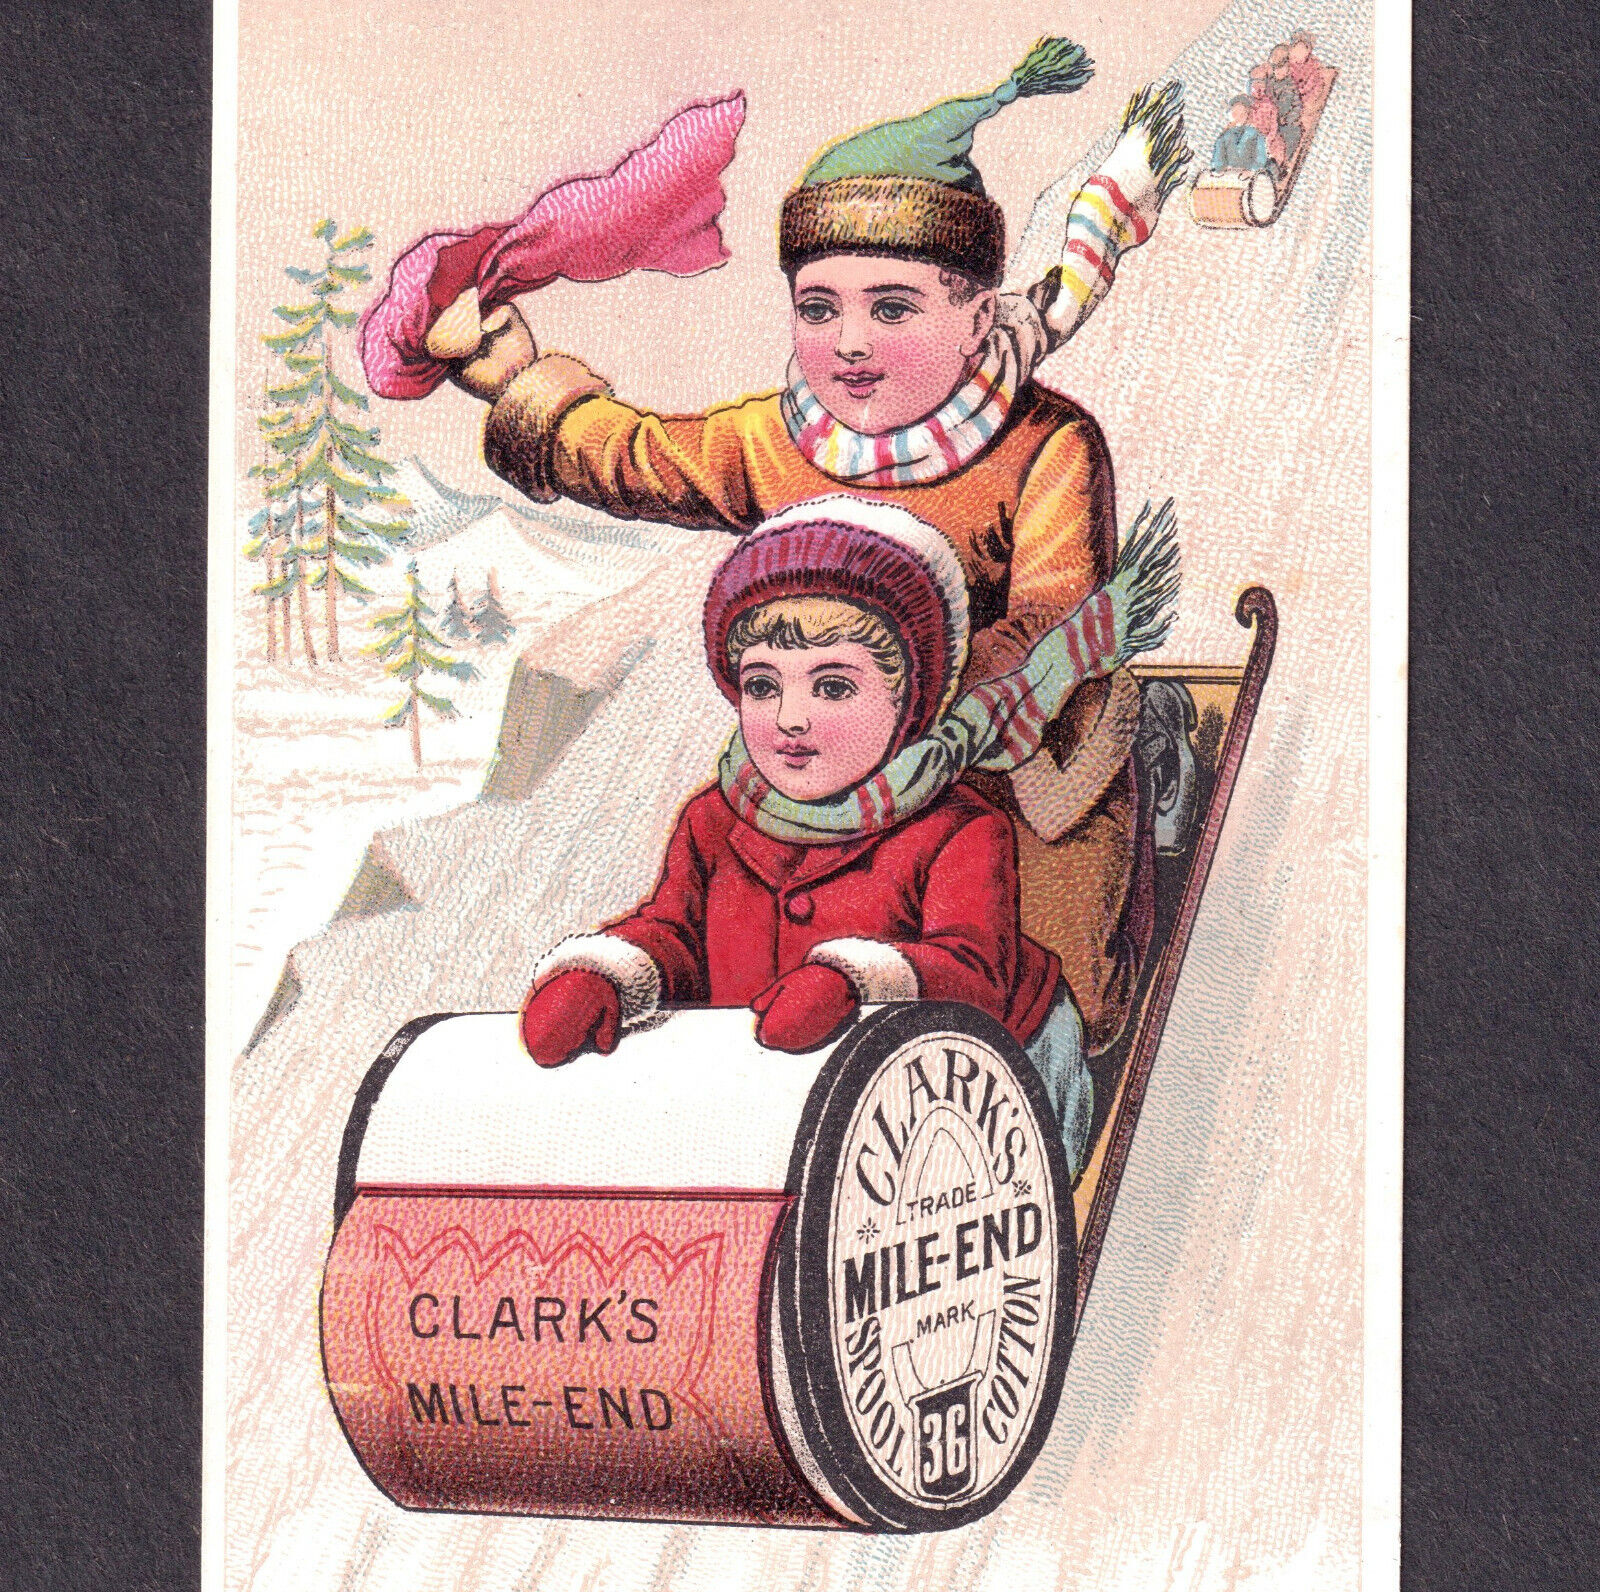 Clarks Sewing Thread Winter Toboggan Sled Comic Scarcer old Victorian Trade Card